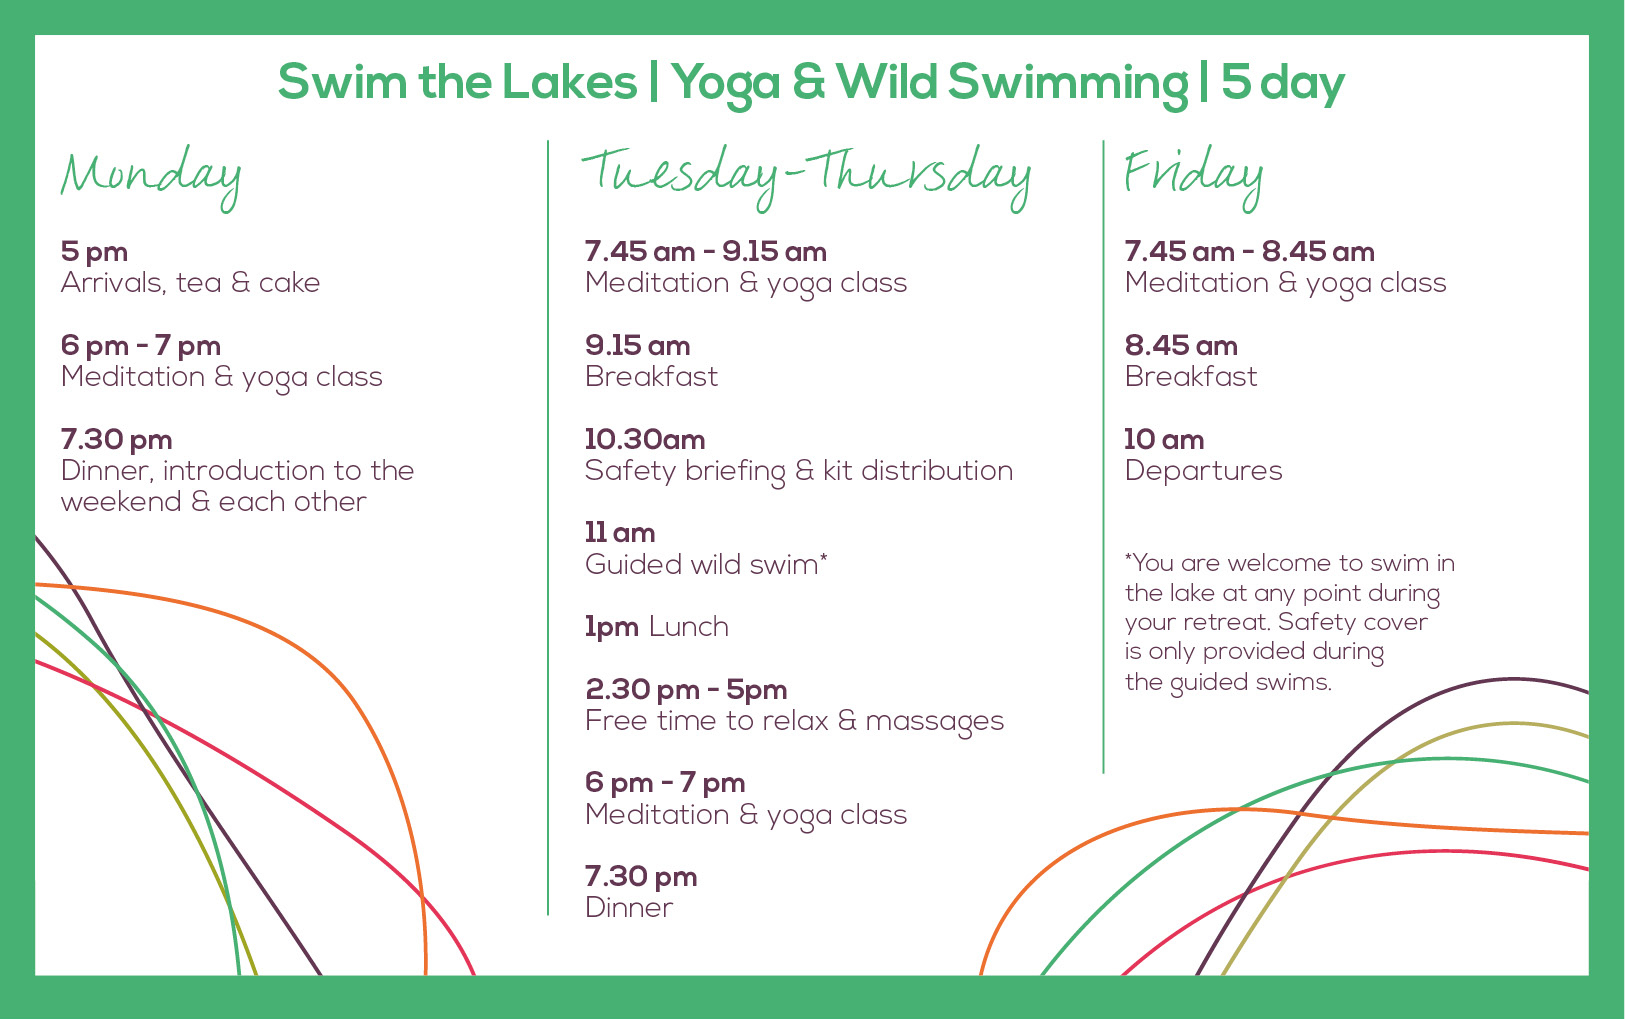 itinerary for Swim the Lakes 5 day retreat